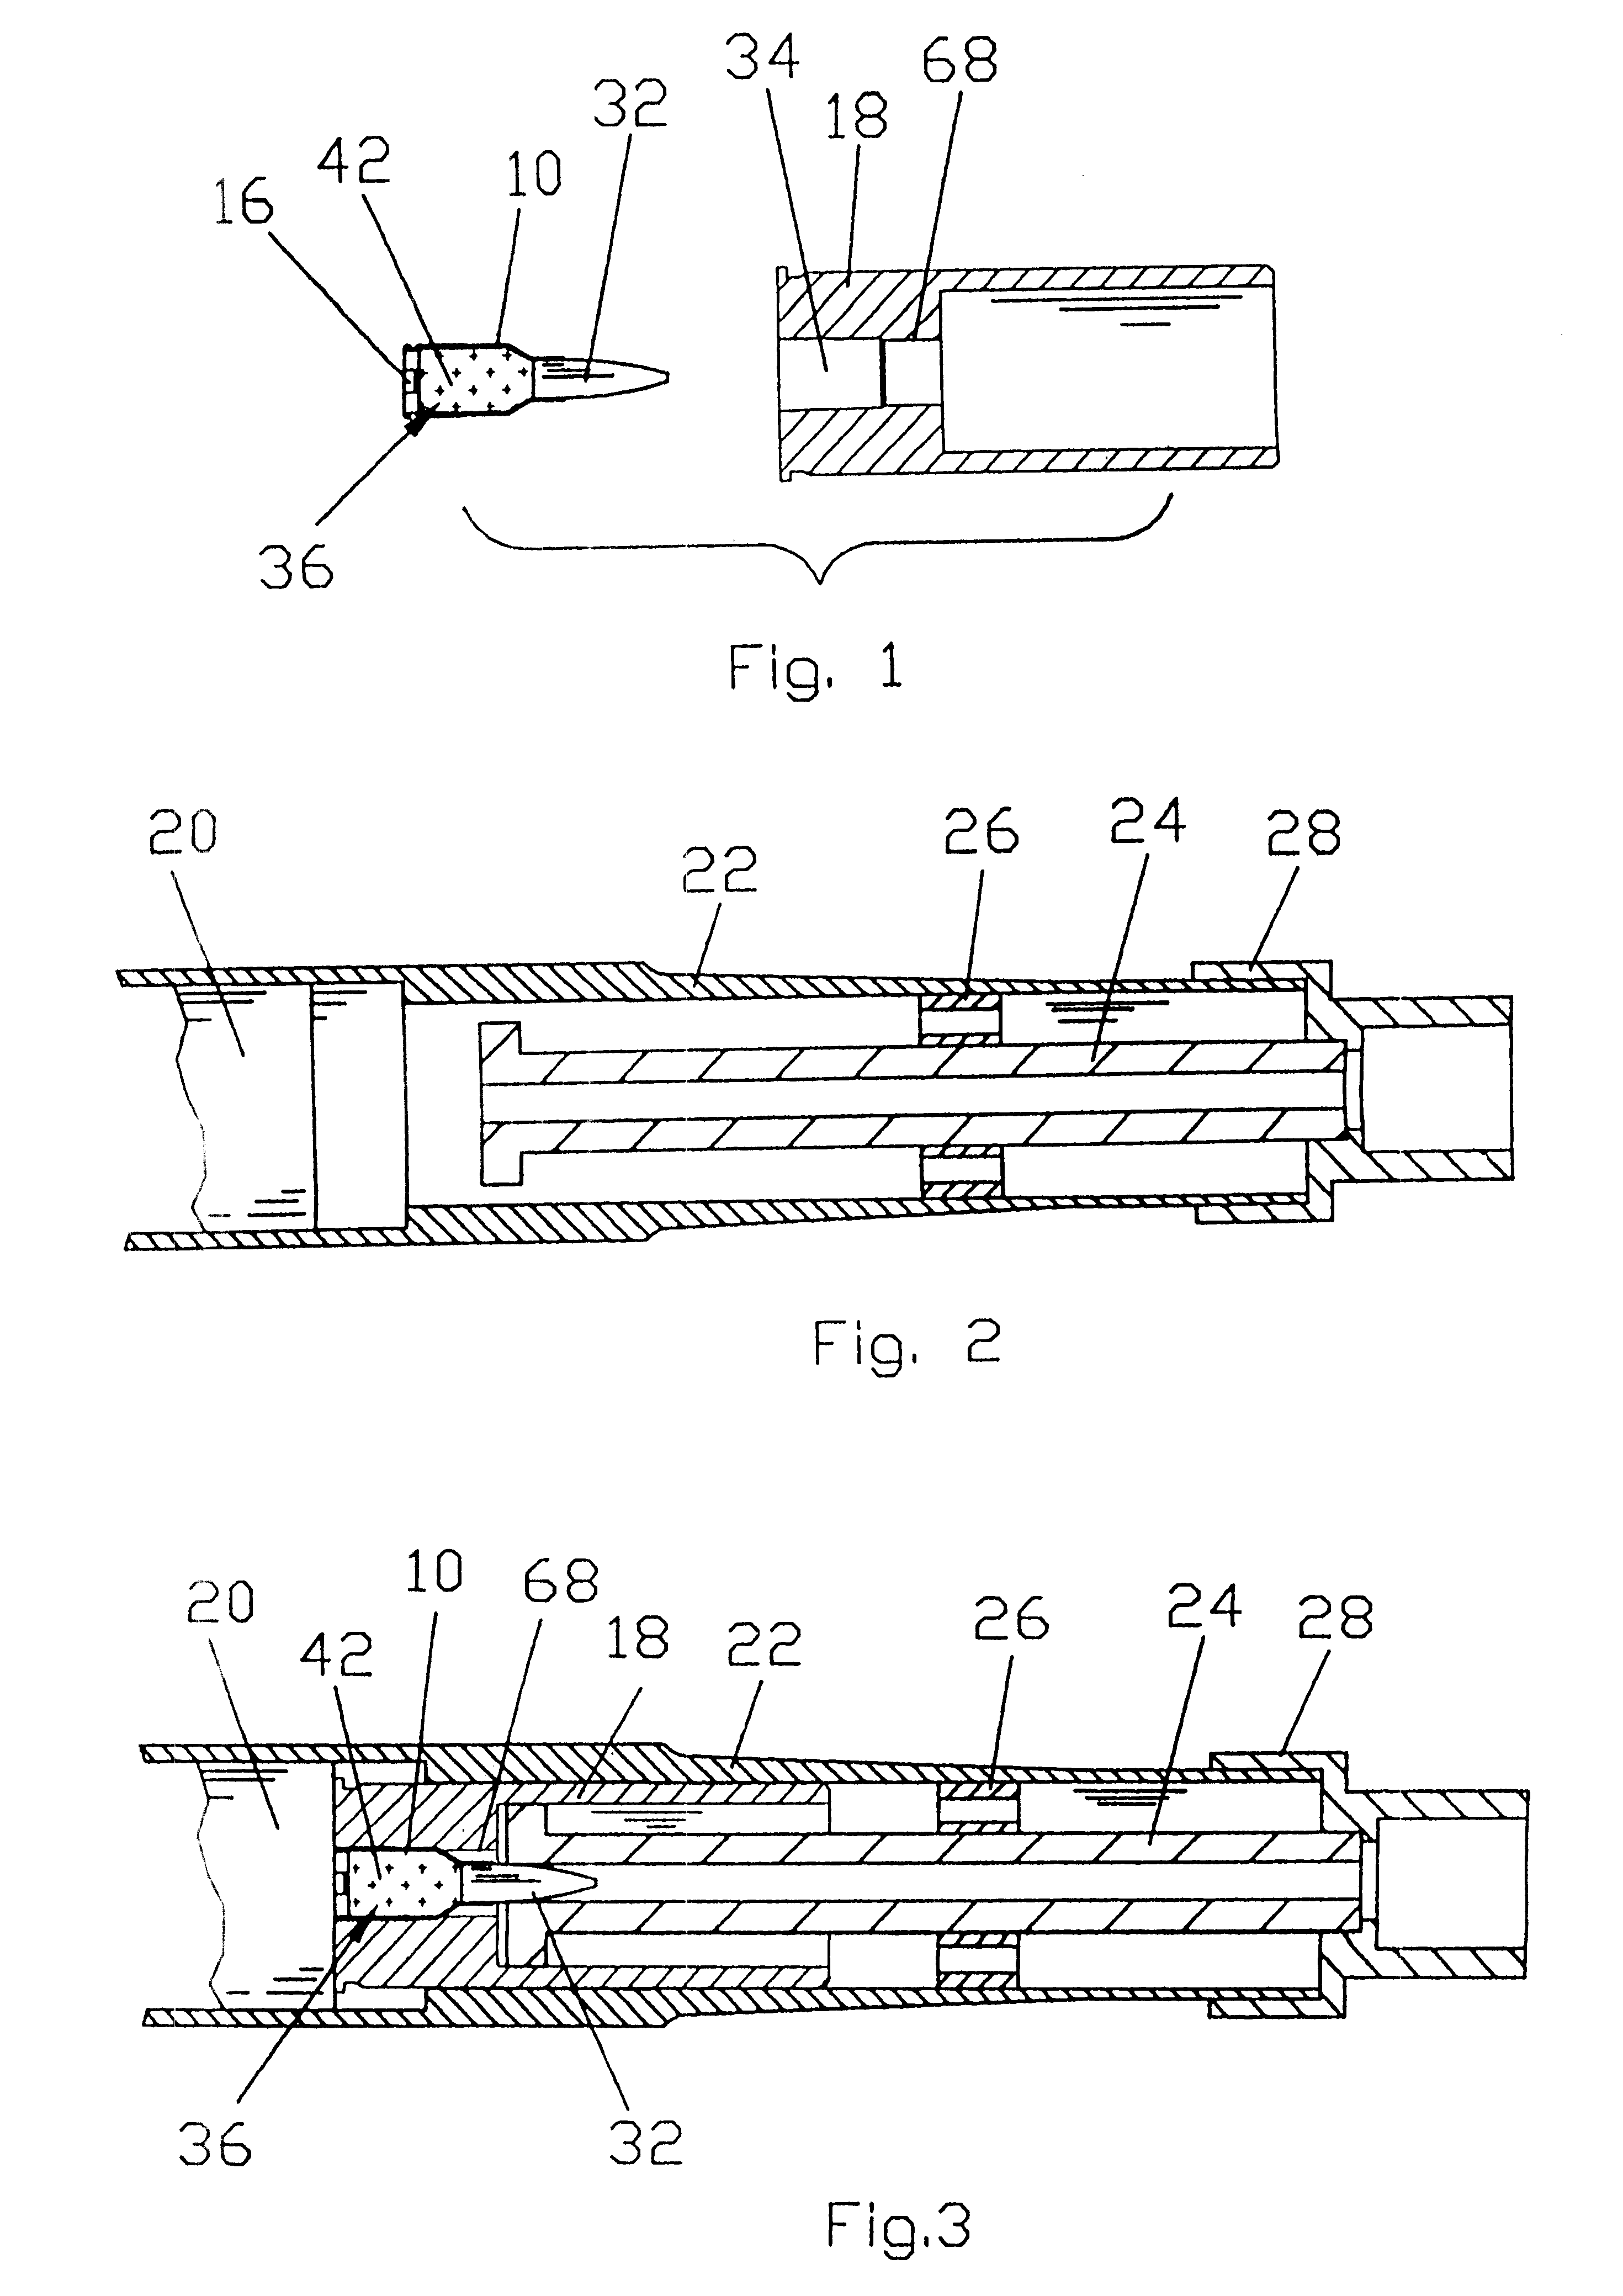 Subcaliber device/blank firing adaptor for blowback operated or recoil operated weapons